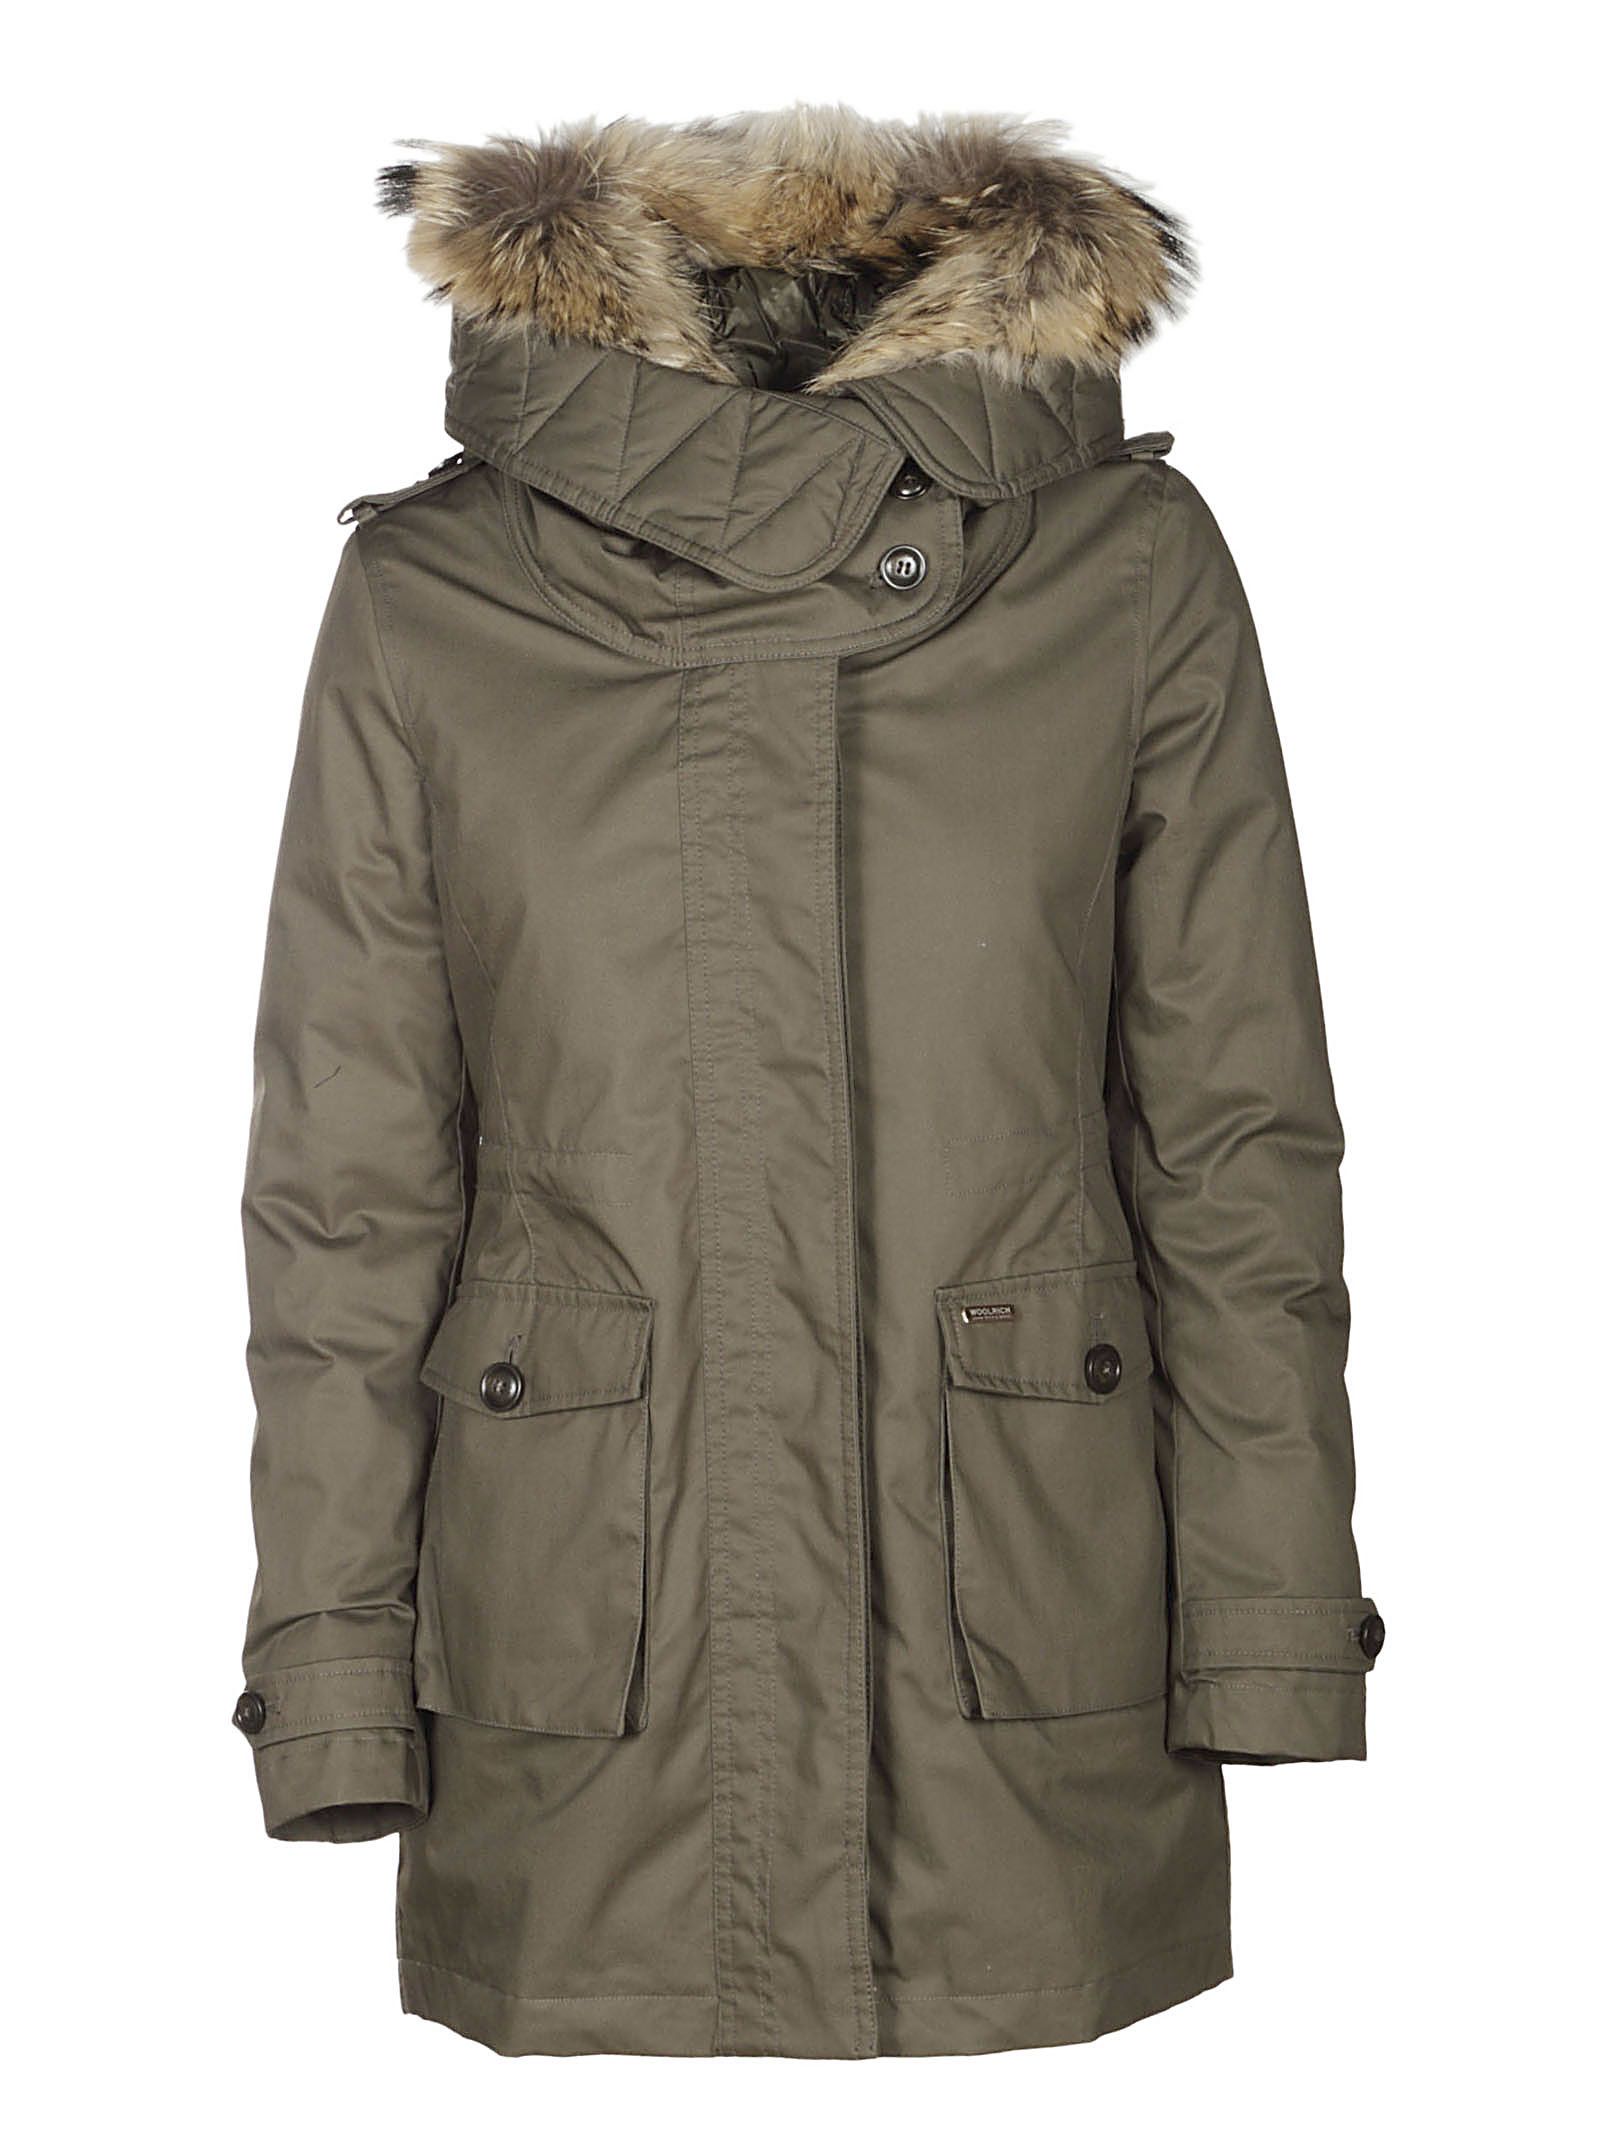 italist | Best price in the market for Woolrich Woolrich Hooded Parka ...